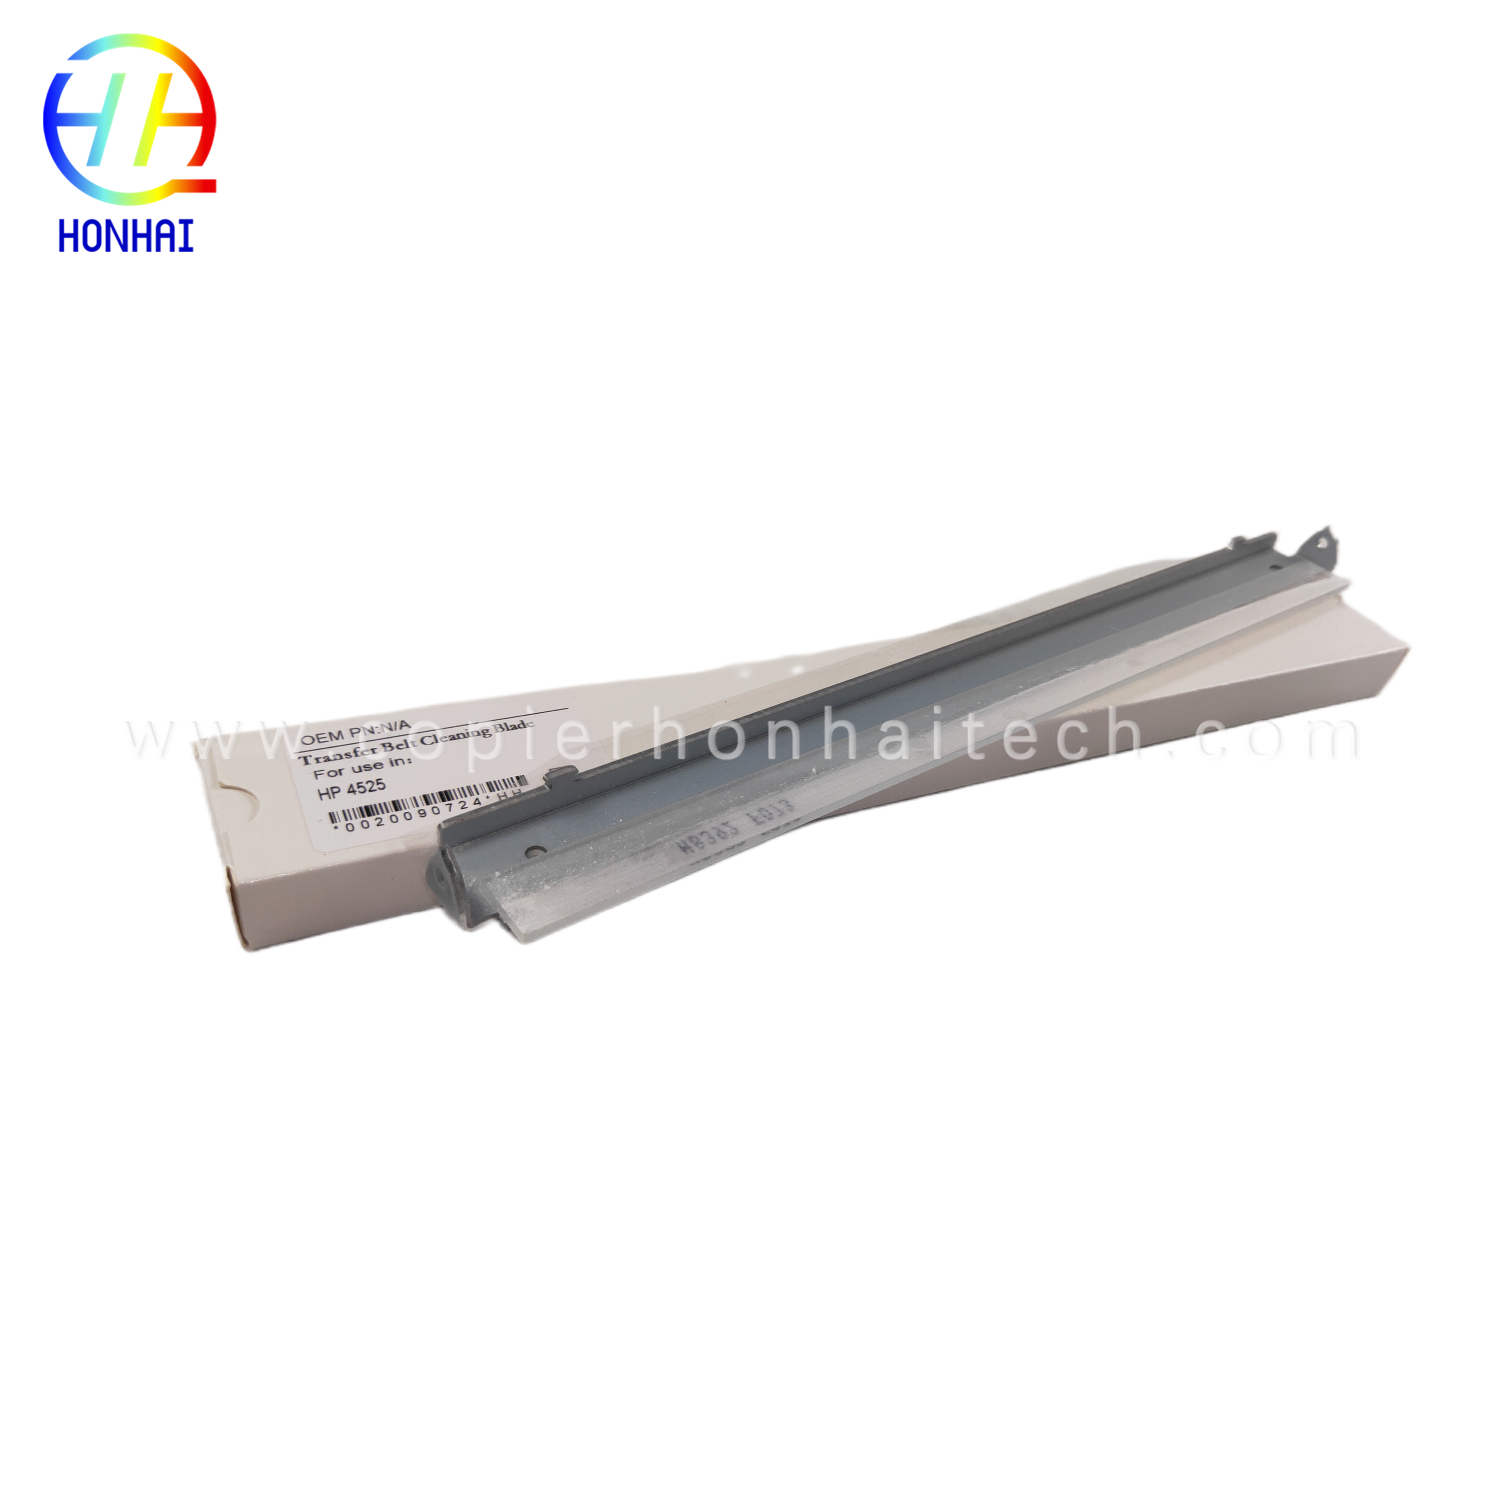 Transfer Belt Cleaning Blade for HP CM4540 CM3530 CP3520 CP3525 500 Color M551 M570 M575 CP4025 CP4525 M651 M680 CC468-67907